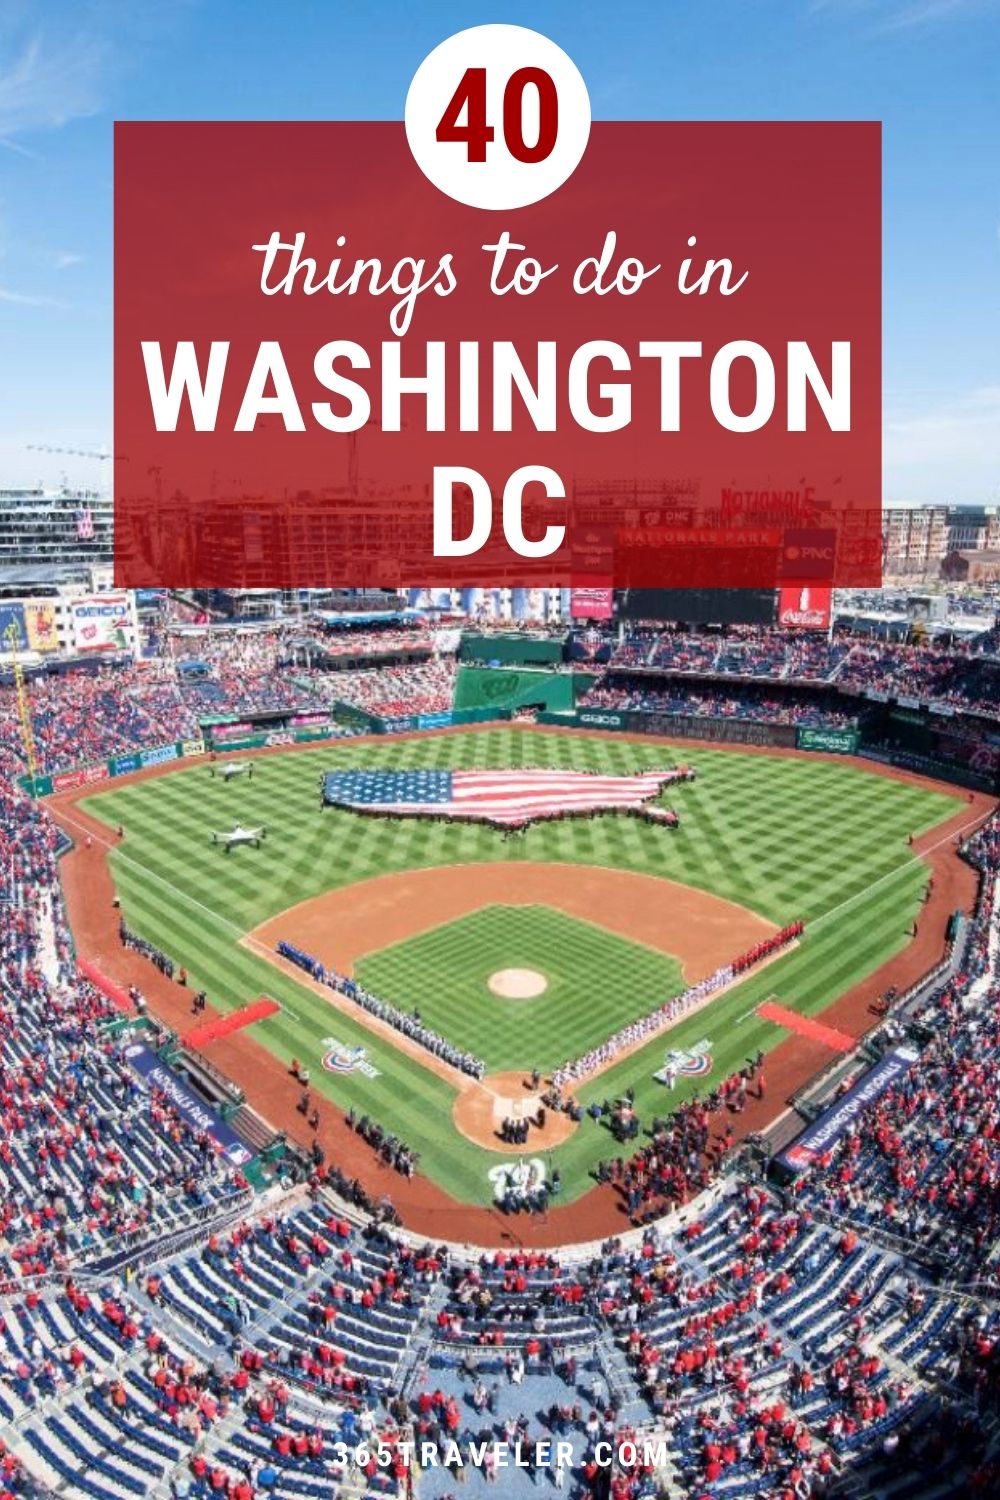 40+ THINGS TO DO IN WASHINGTON DC YOU CAN'T MISS